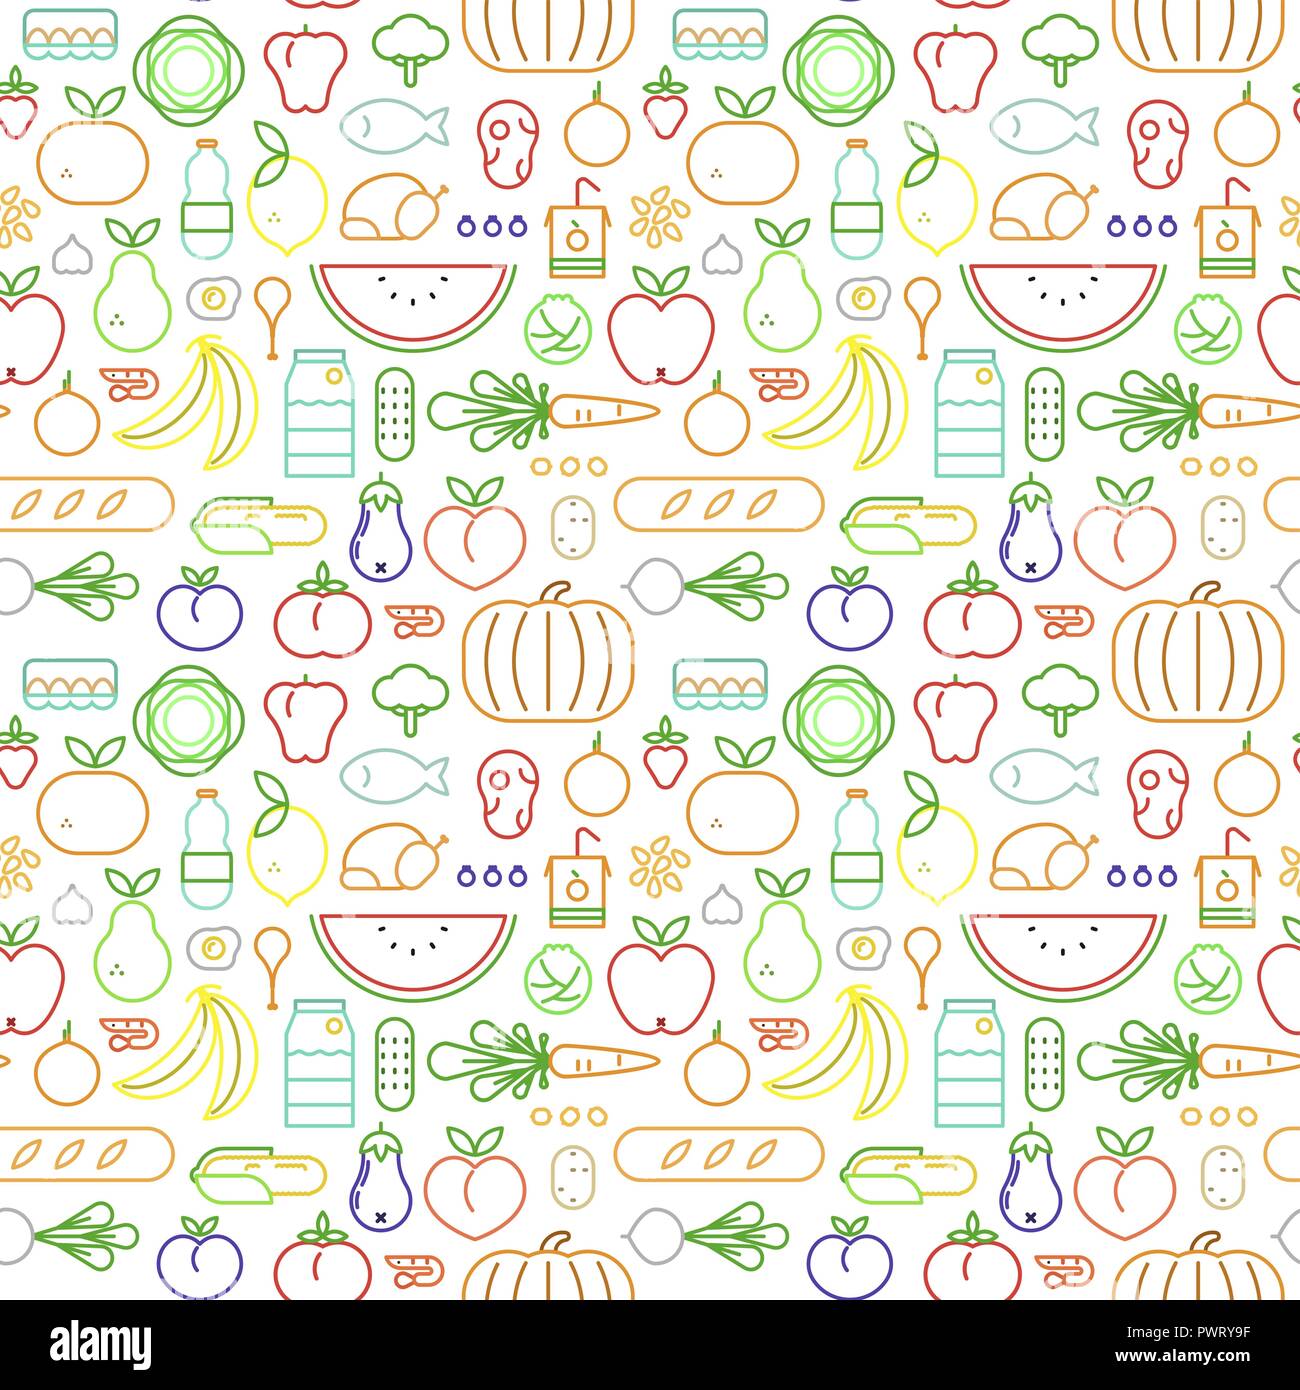 Food icon seamless pattern with colorful outline style symbols